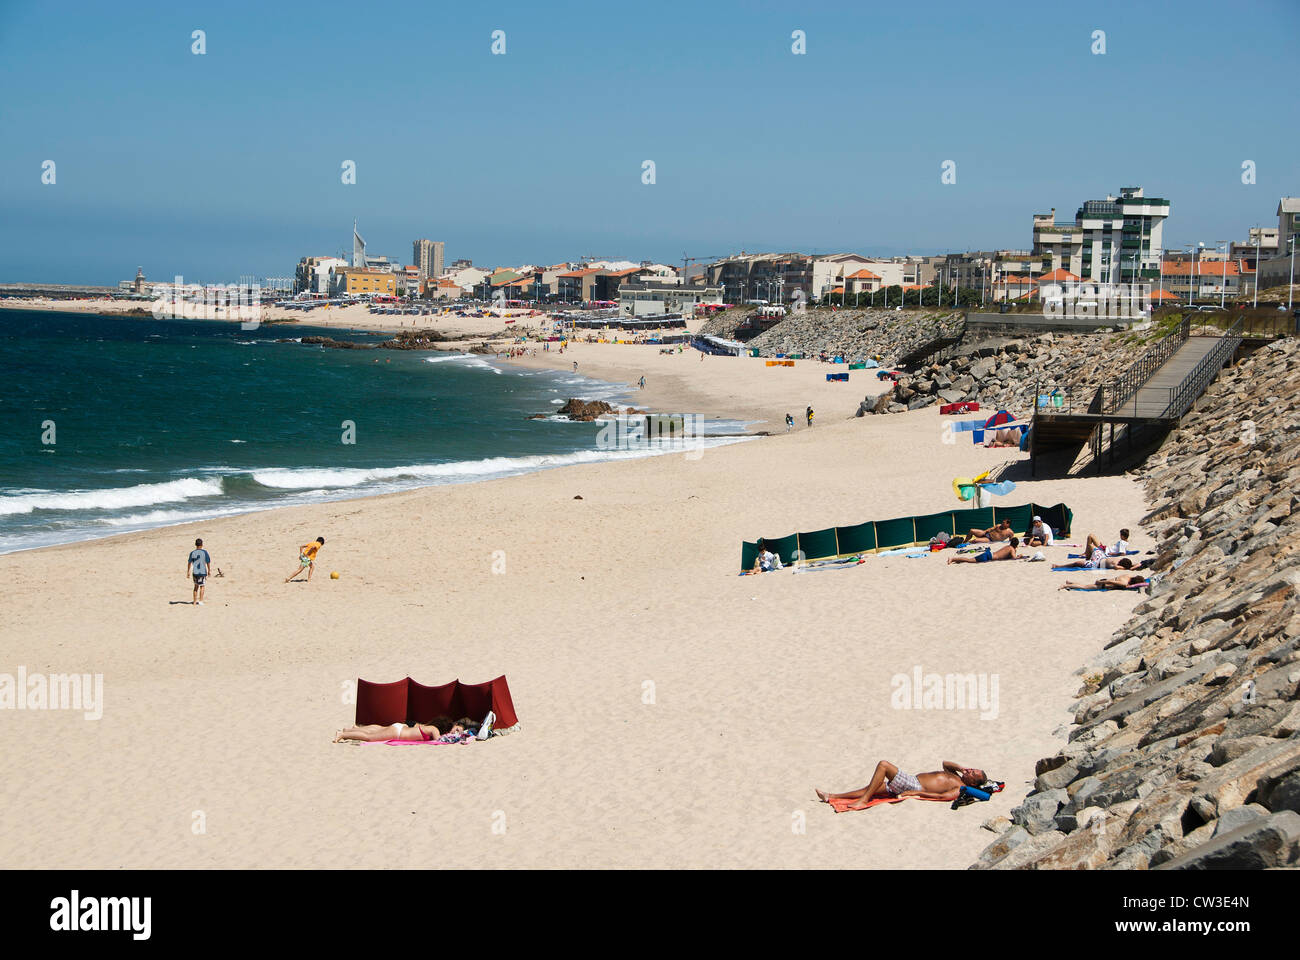 View of beach at Vila do Conde, Portugal Stock Photo